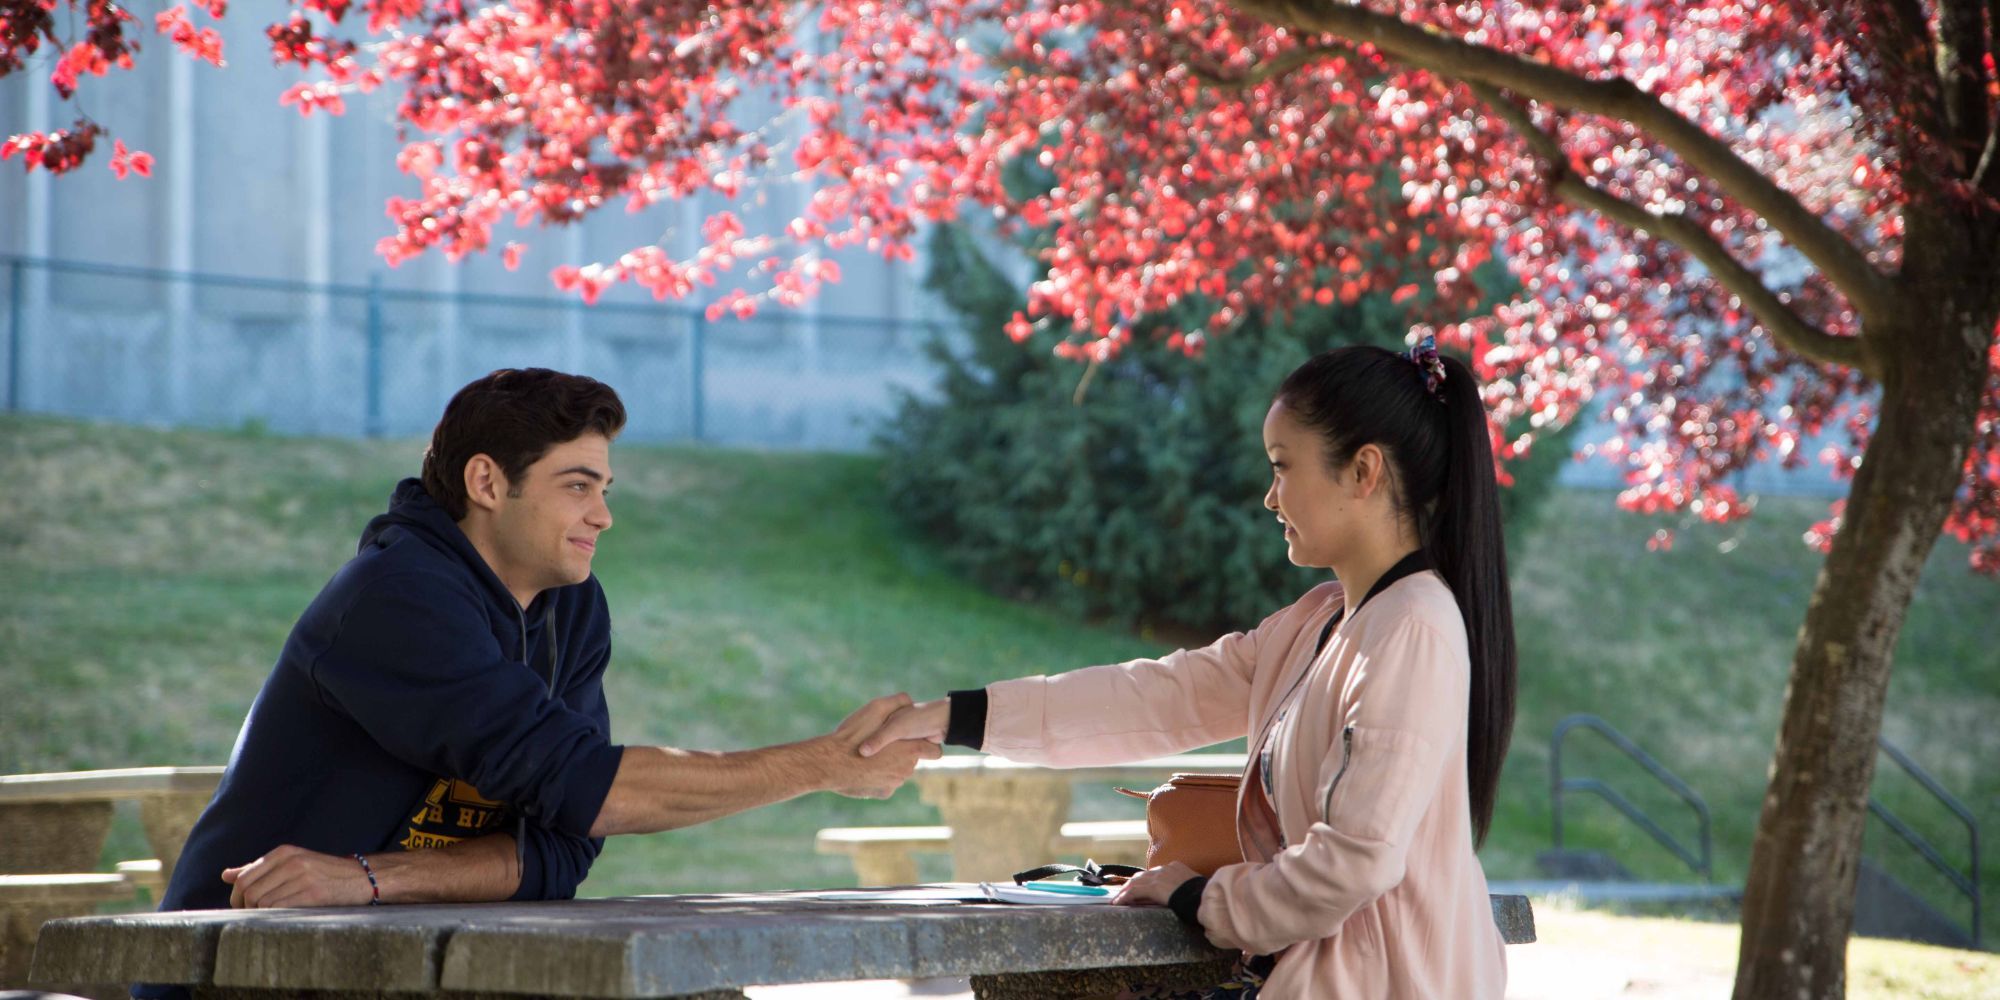 Lana Condor and Noah Centineo in To All the Boys I've Loved Before sitting under a sakura tree